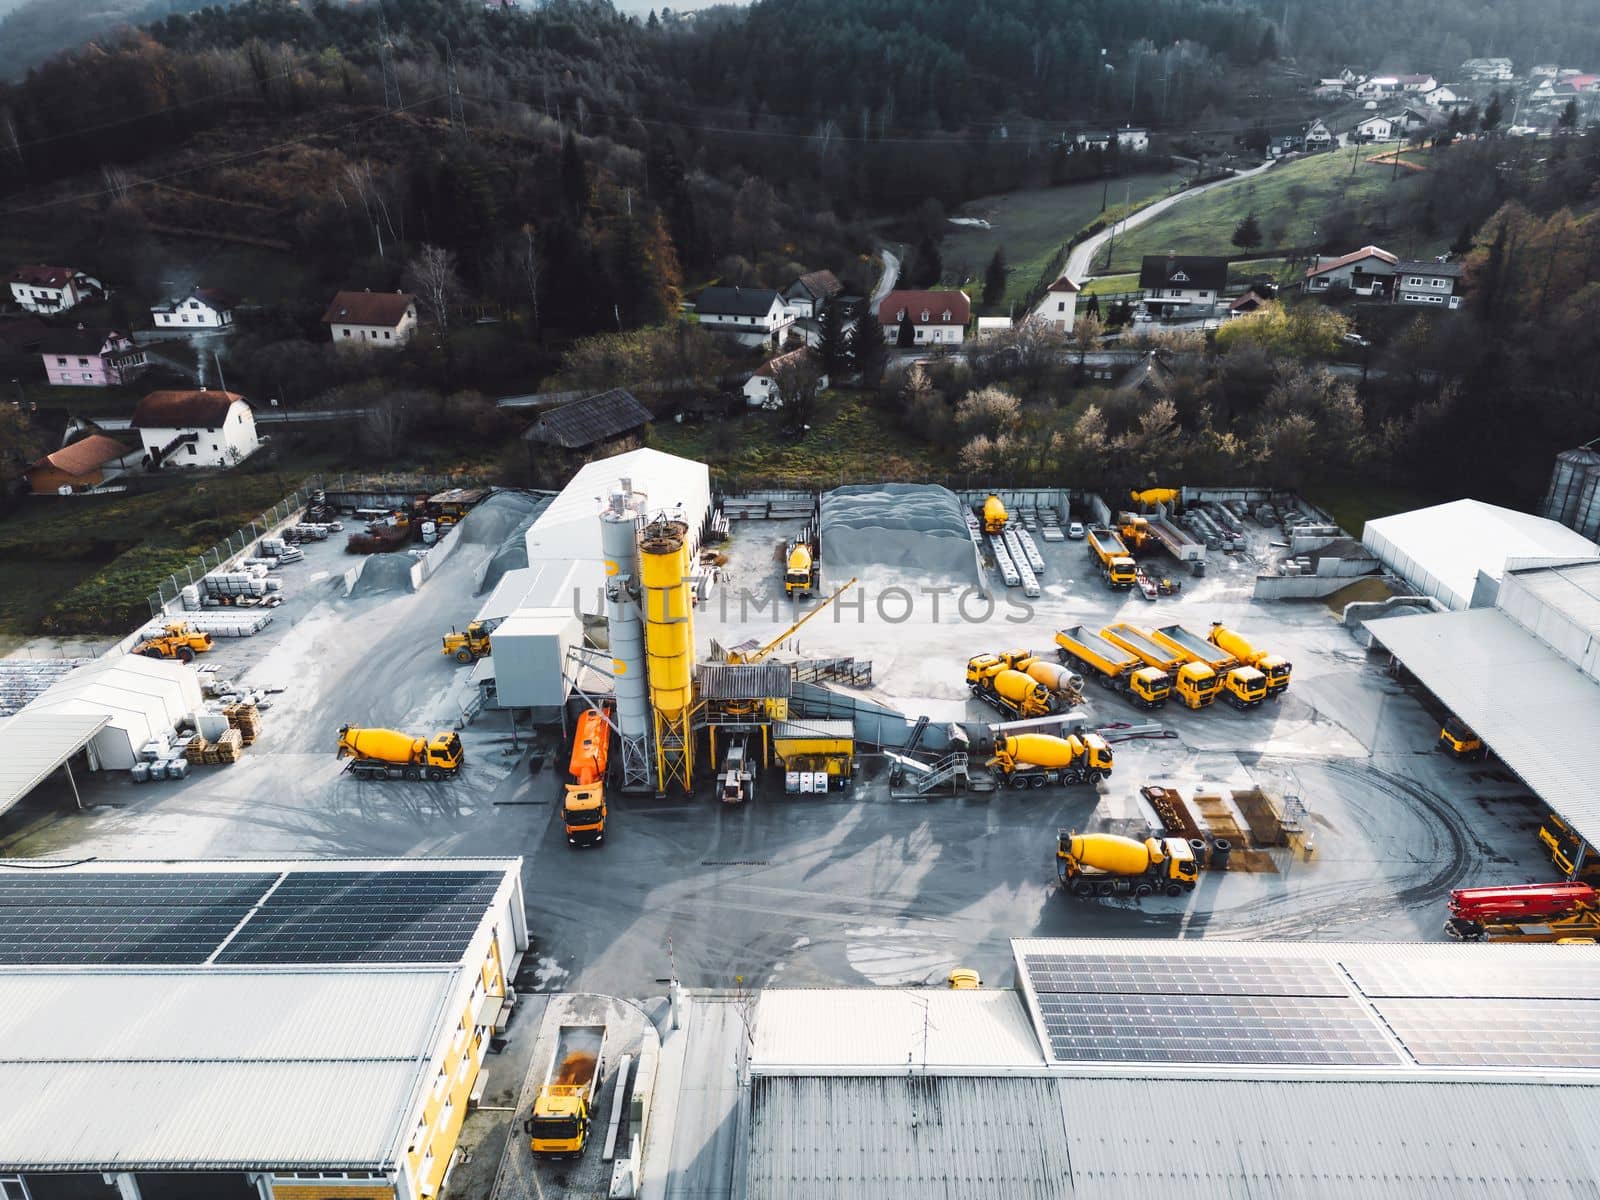 Aerial view in industrial area, directly above construction company, firm with lots of heavy machinery on the grounds, yellow trucks and other vehicles.